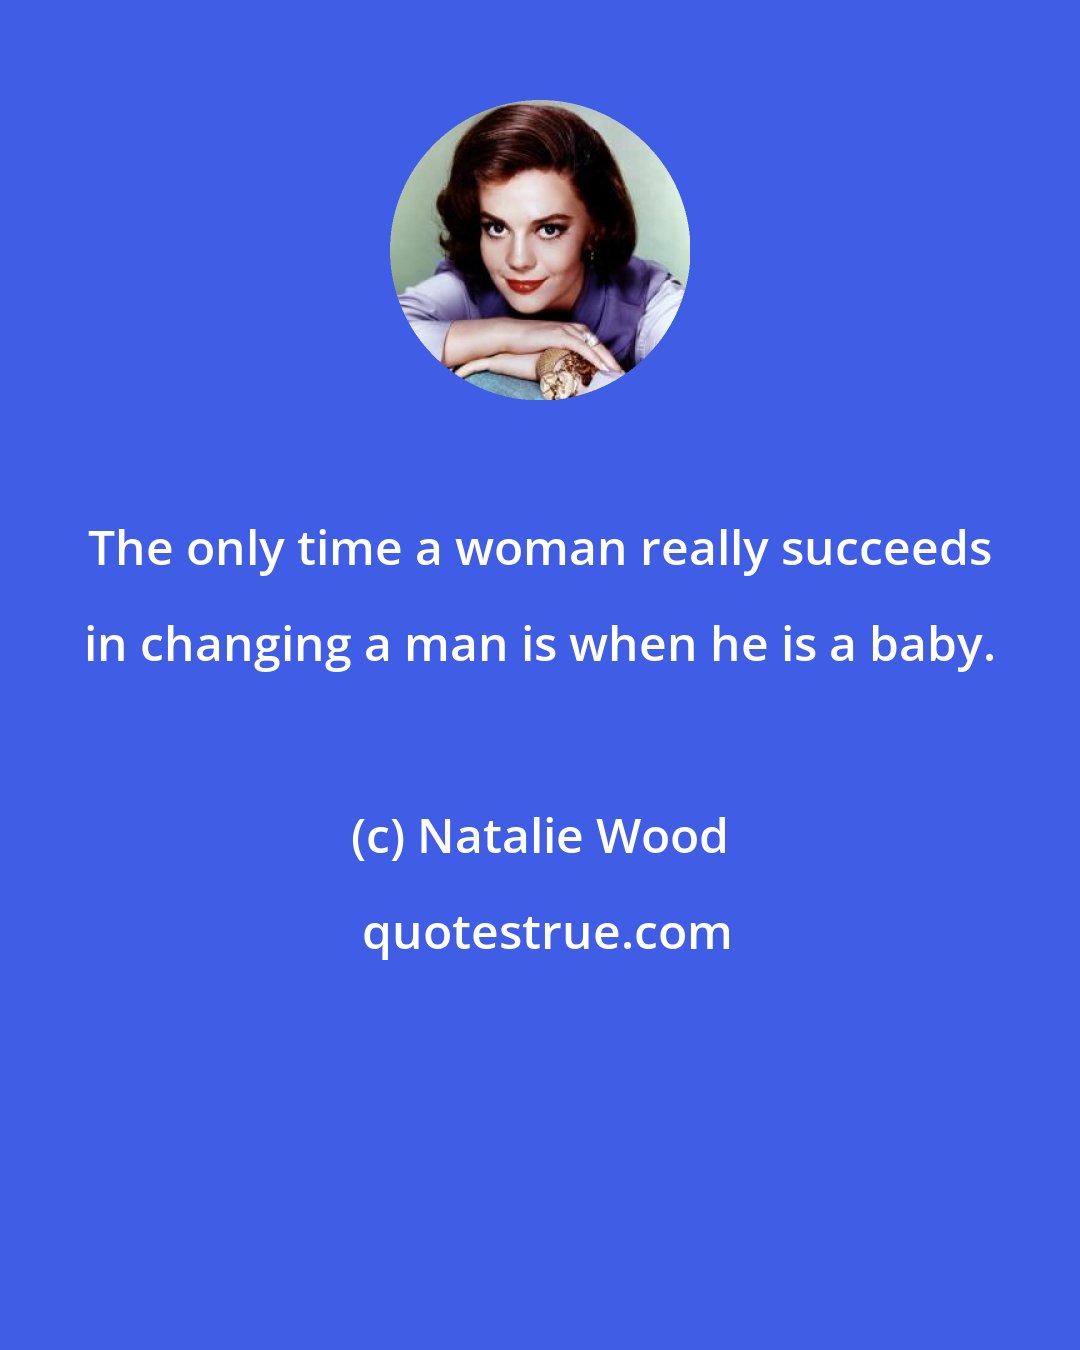 Natalie Wood: The only time a woman really succeeds in changing a man is when he is a baby.